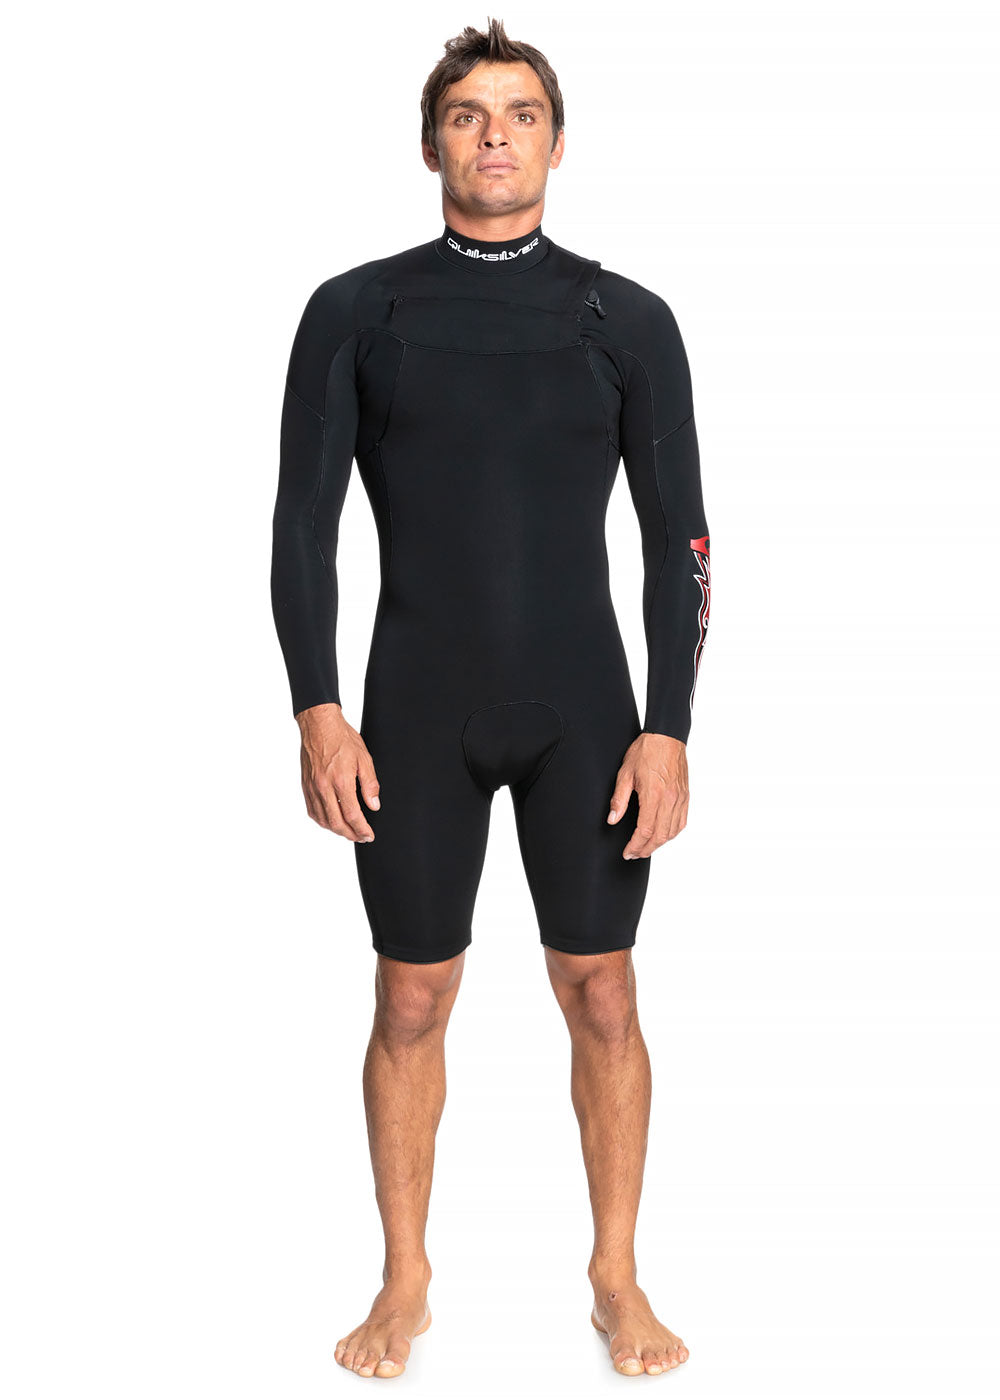 Quiksilver Mens 2/2mm Capsule Sessions Long Sleeve Chest Zip Spring Suit